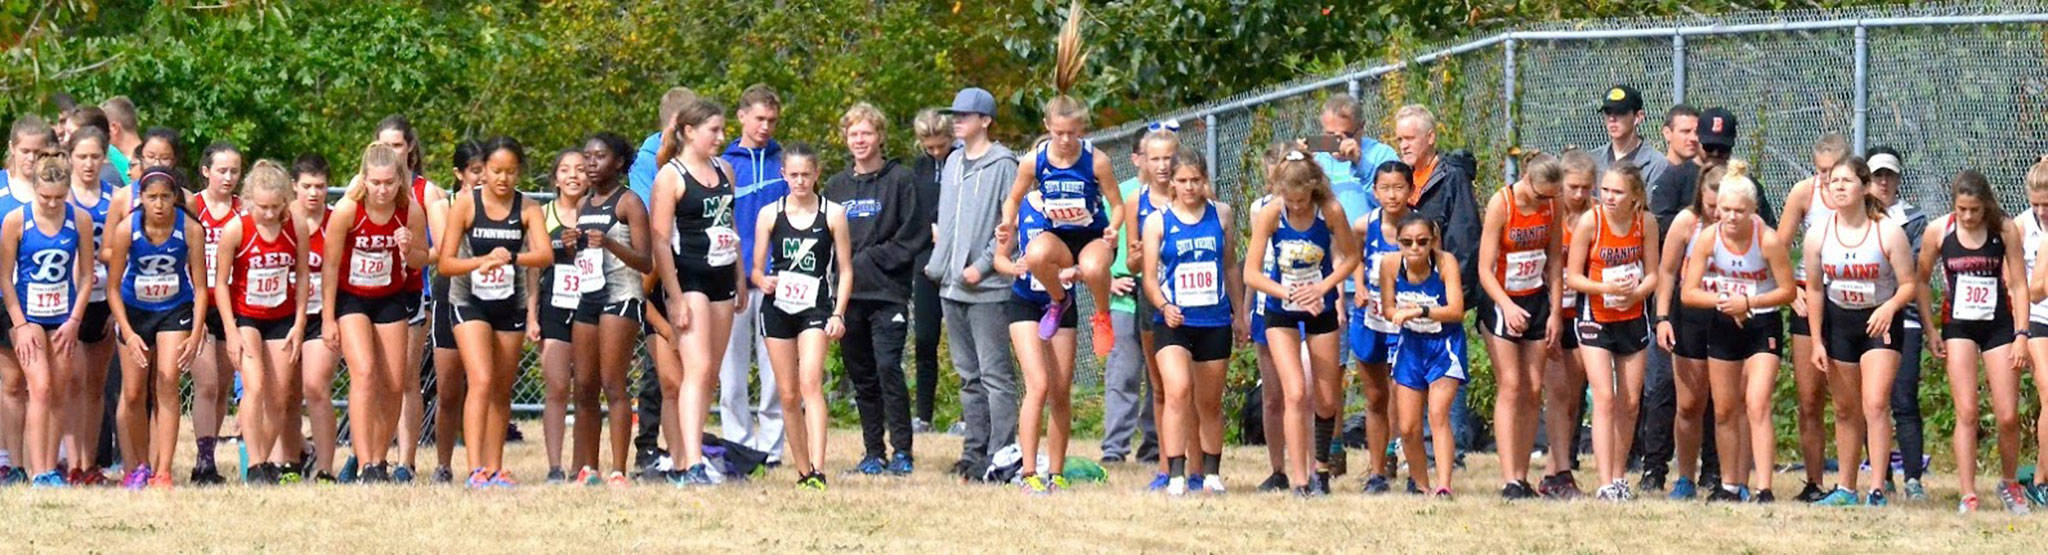 South Whidbey’s Kaia Swegler Richmond is hopping to go at the start of the sophomore girls race Saturday. (Photo by Karen Swegler)